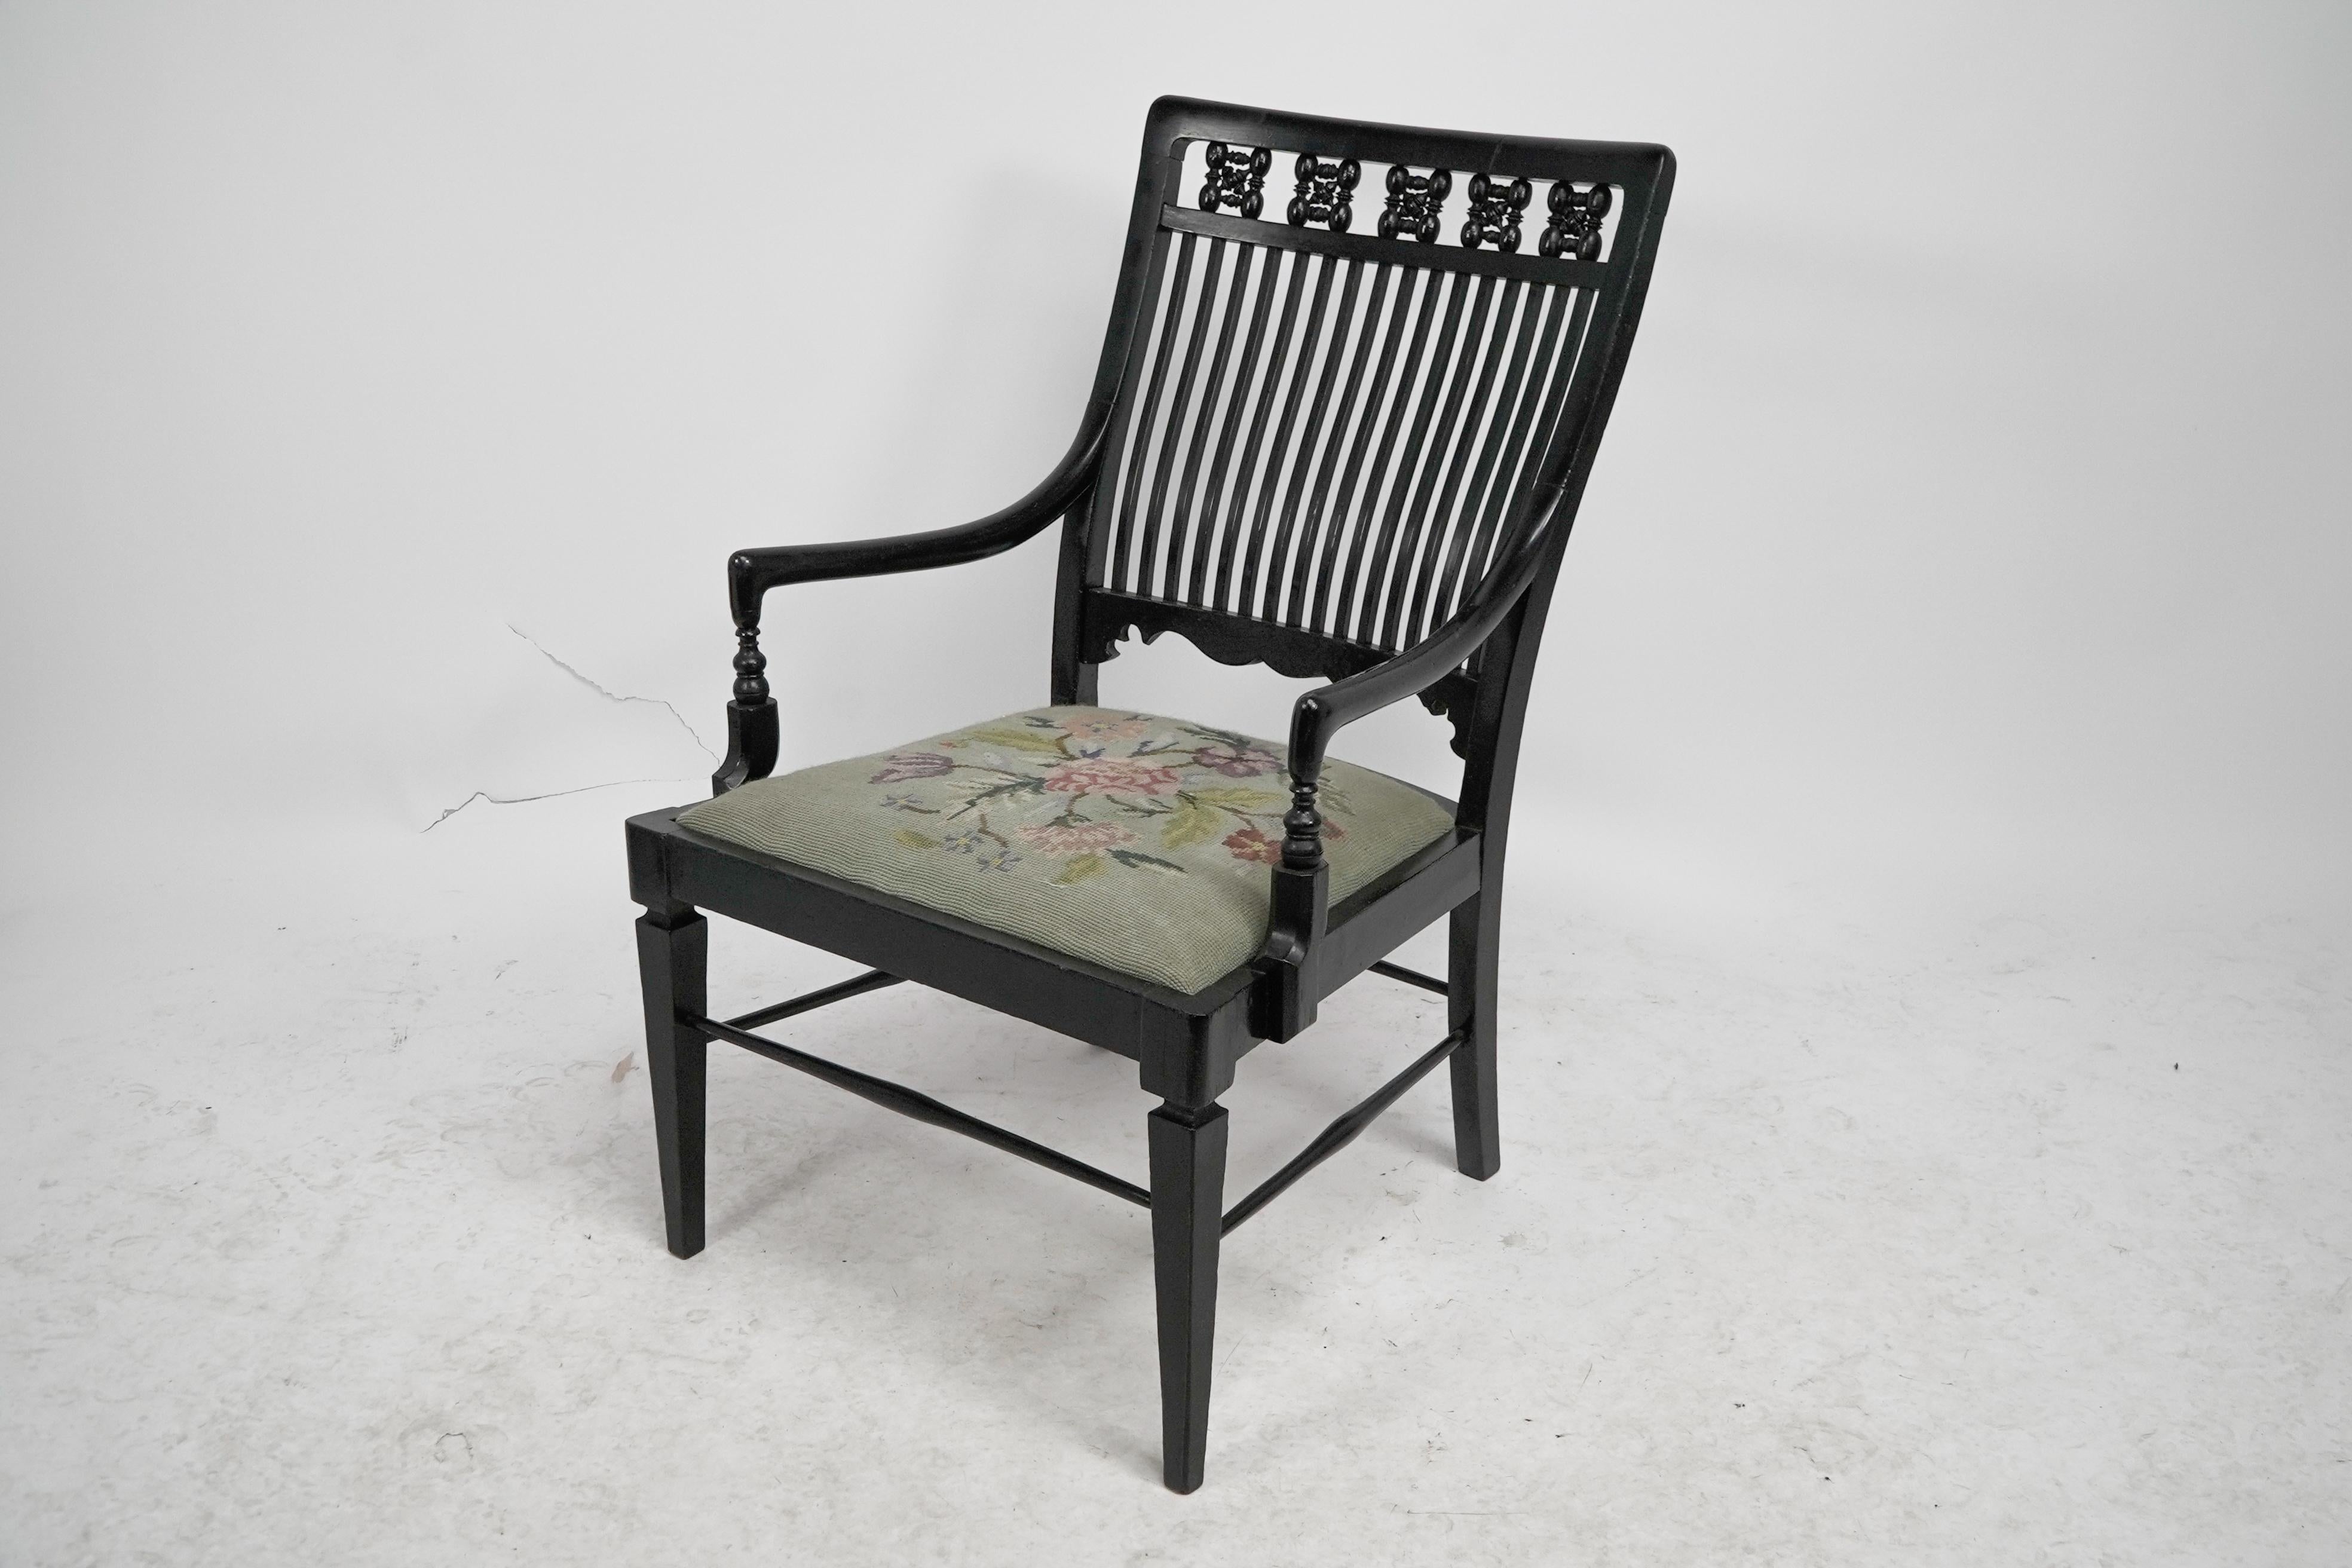 English Liberty & Co armchair with a shaped back & mashrabiya turnings to the head rest. For Sale